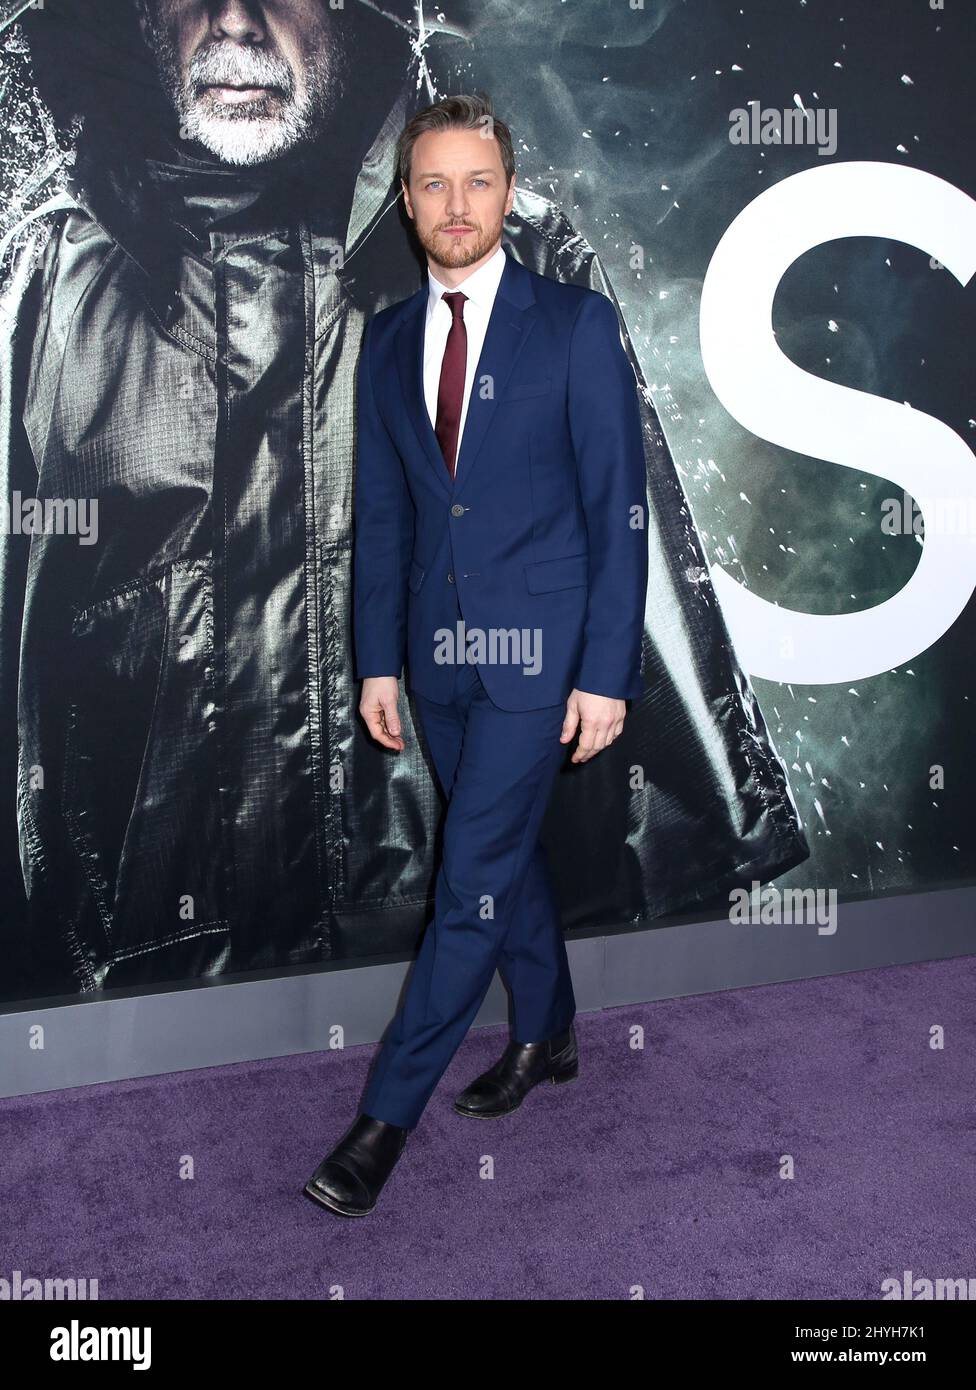 James McAvoy attending the 'Glass' New York Premiere held at the SVA Theater on January 15, 2019 in New York City, NY Stock Photo